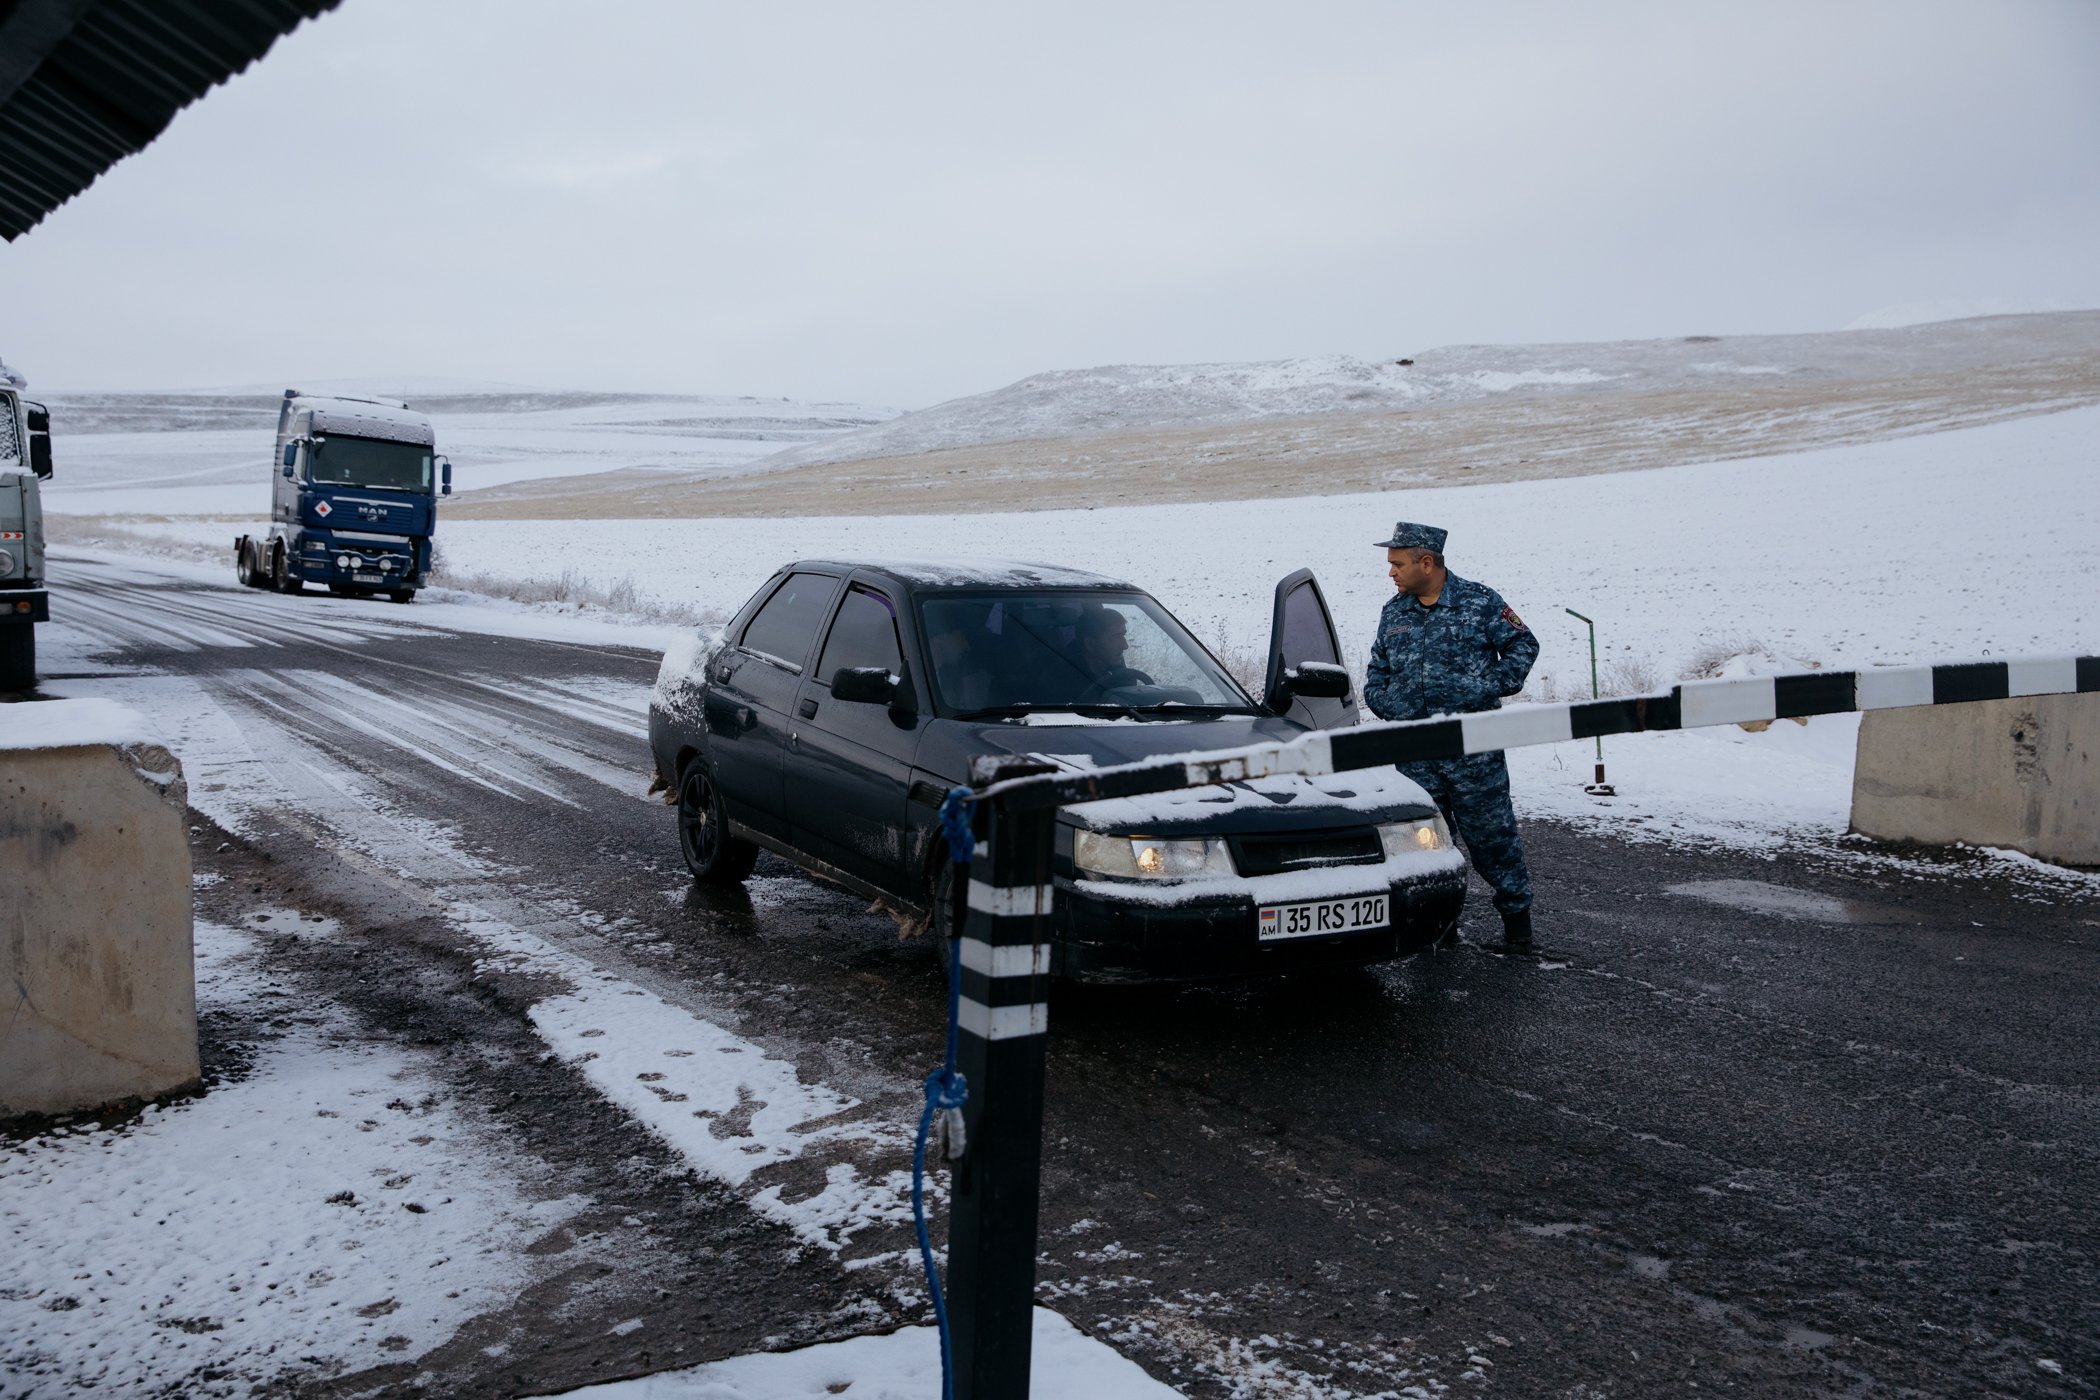  A police officer from Nagorno-Karabakh speaks to a driver at a checkpoint near the village of Tegh. The checkpoint was closed to general traffic by the Armenian authorities once the Azerbaijani blockade commenced. 